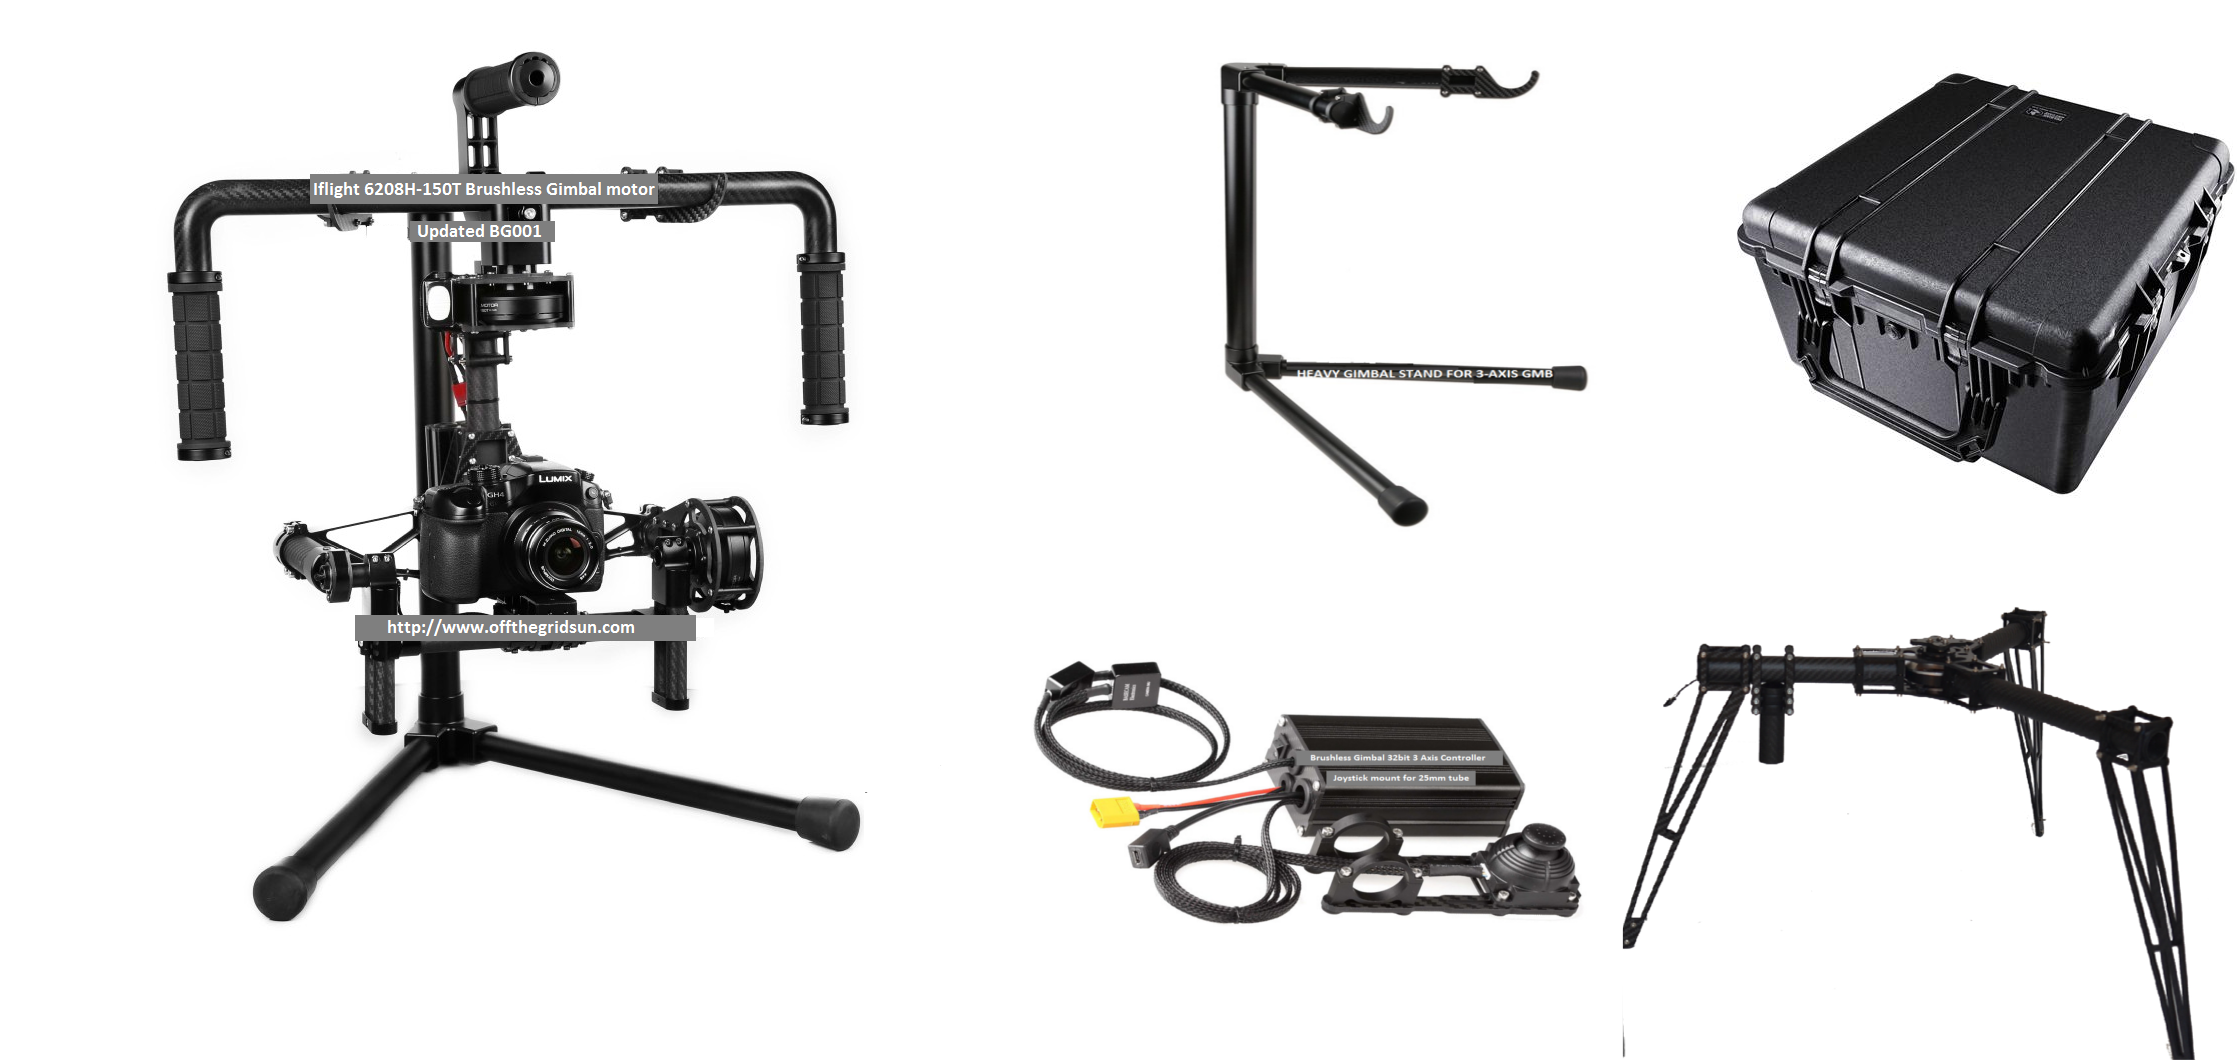 CINESTAR 3 Axis Brushless GIMBAL system Steadicam & LANDING GEAR - Click Image to Close